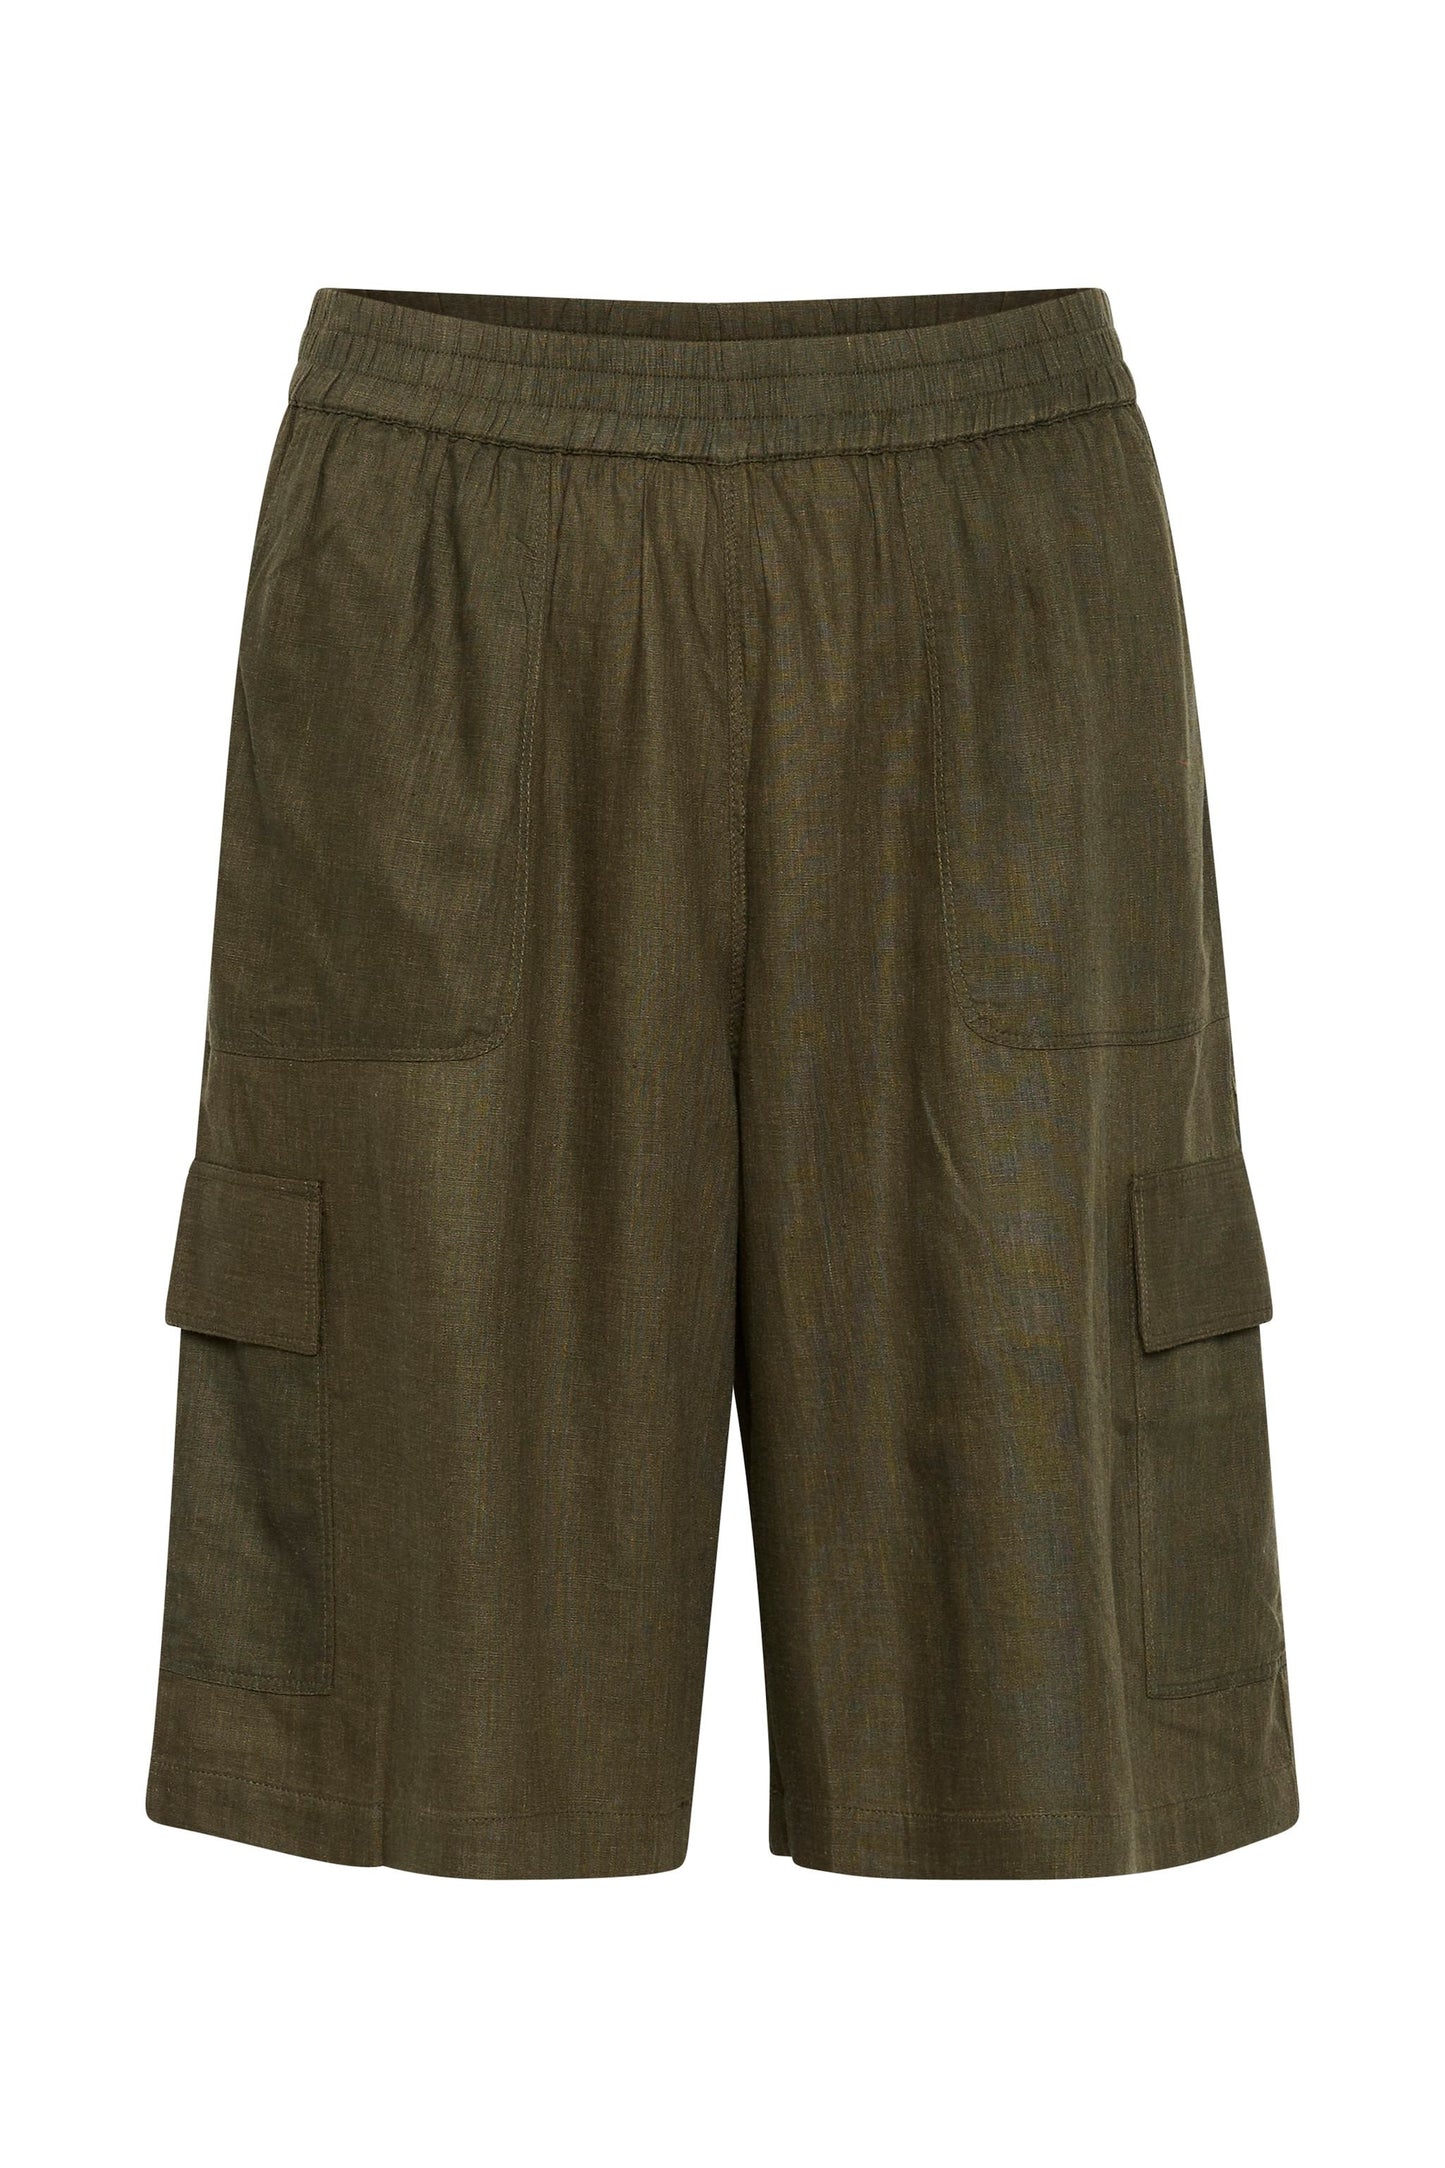 KAFFE Milia Shorts in Forest Night